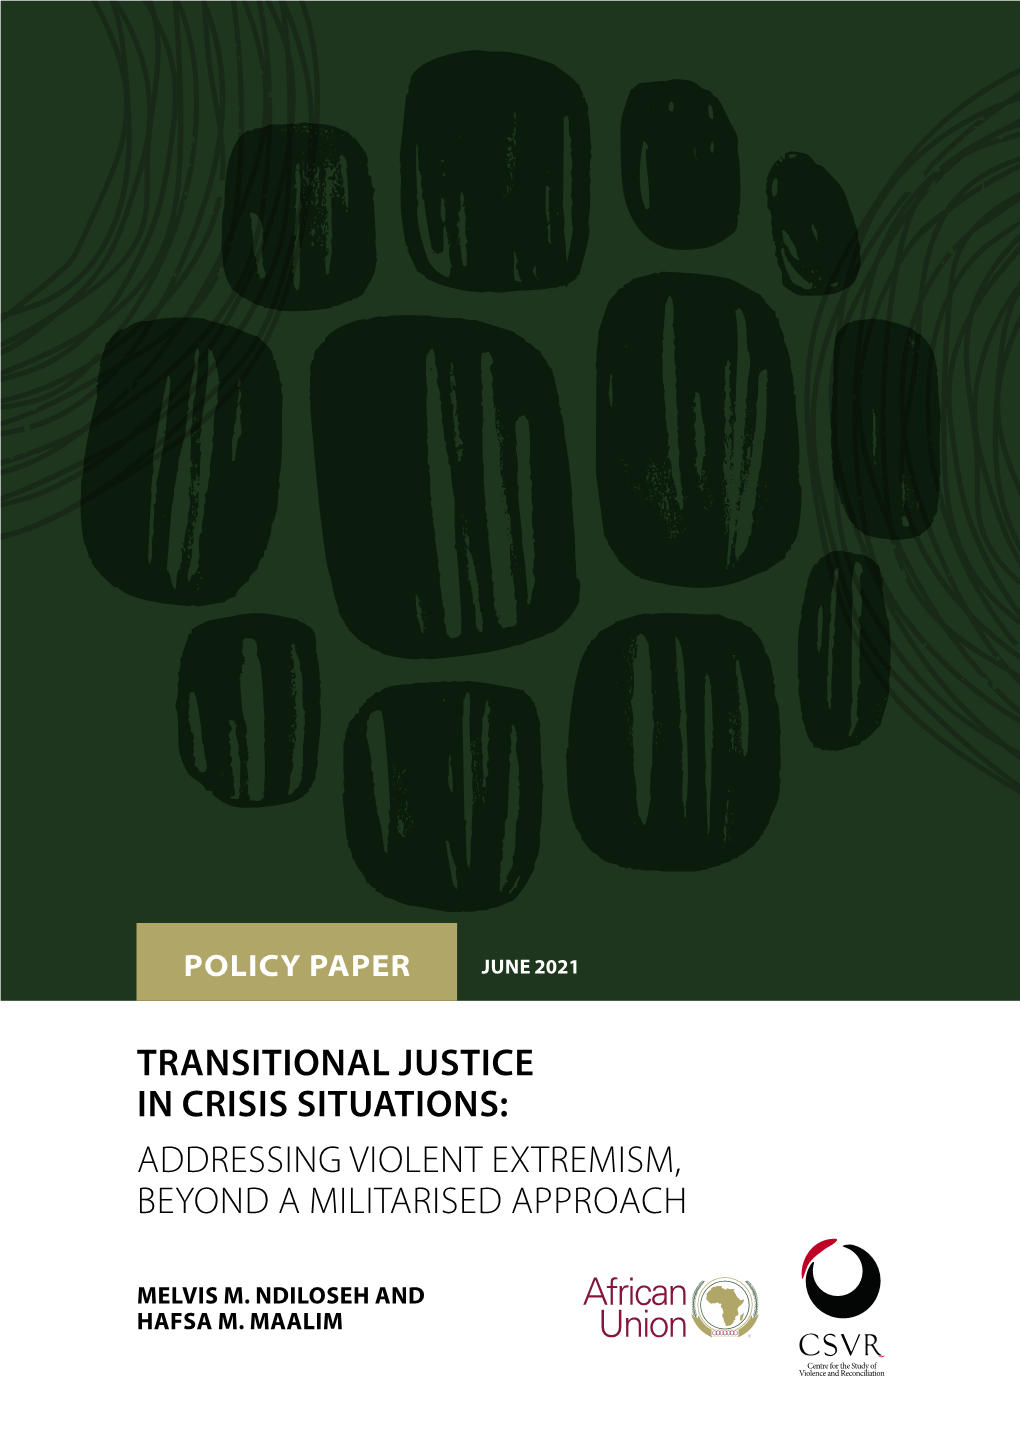 Transitional Justice in Crisis Situations: Addressing Violent Extremism, Beyond a Militarised Approach